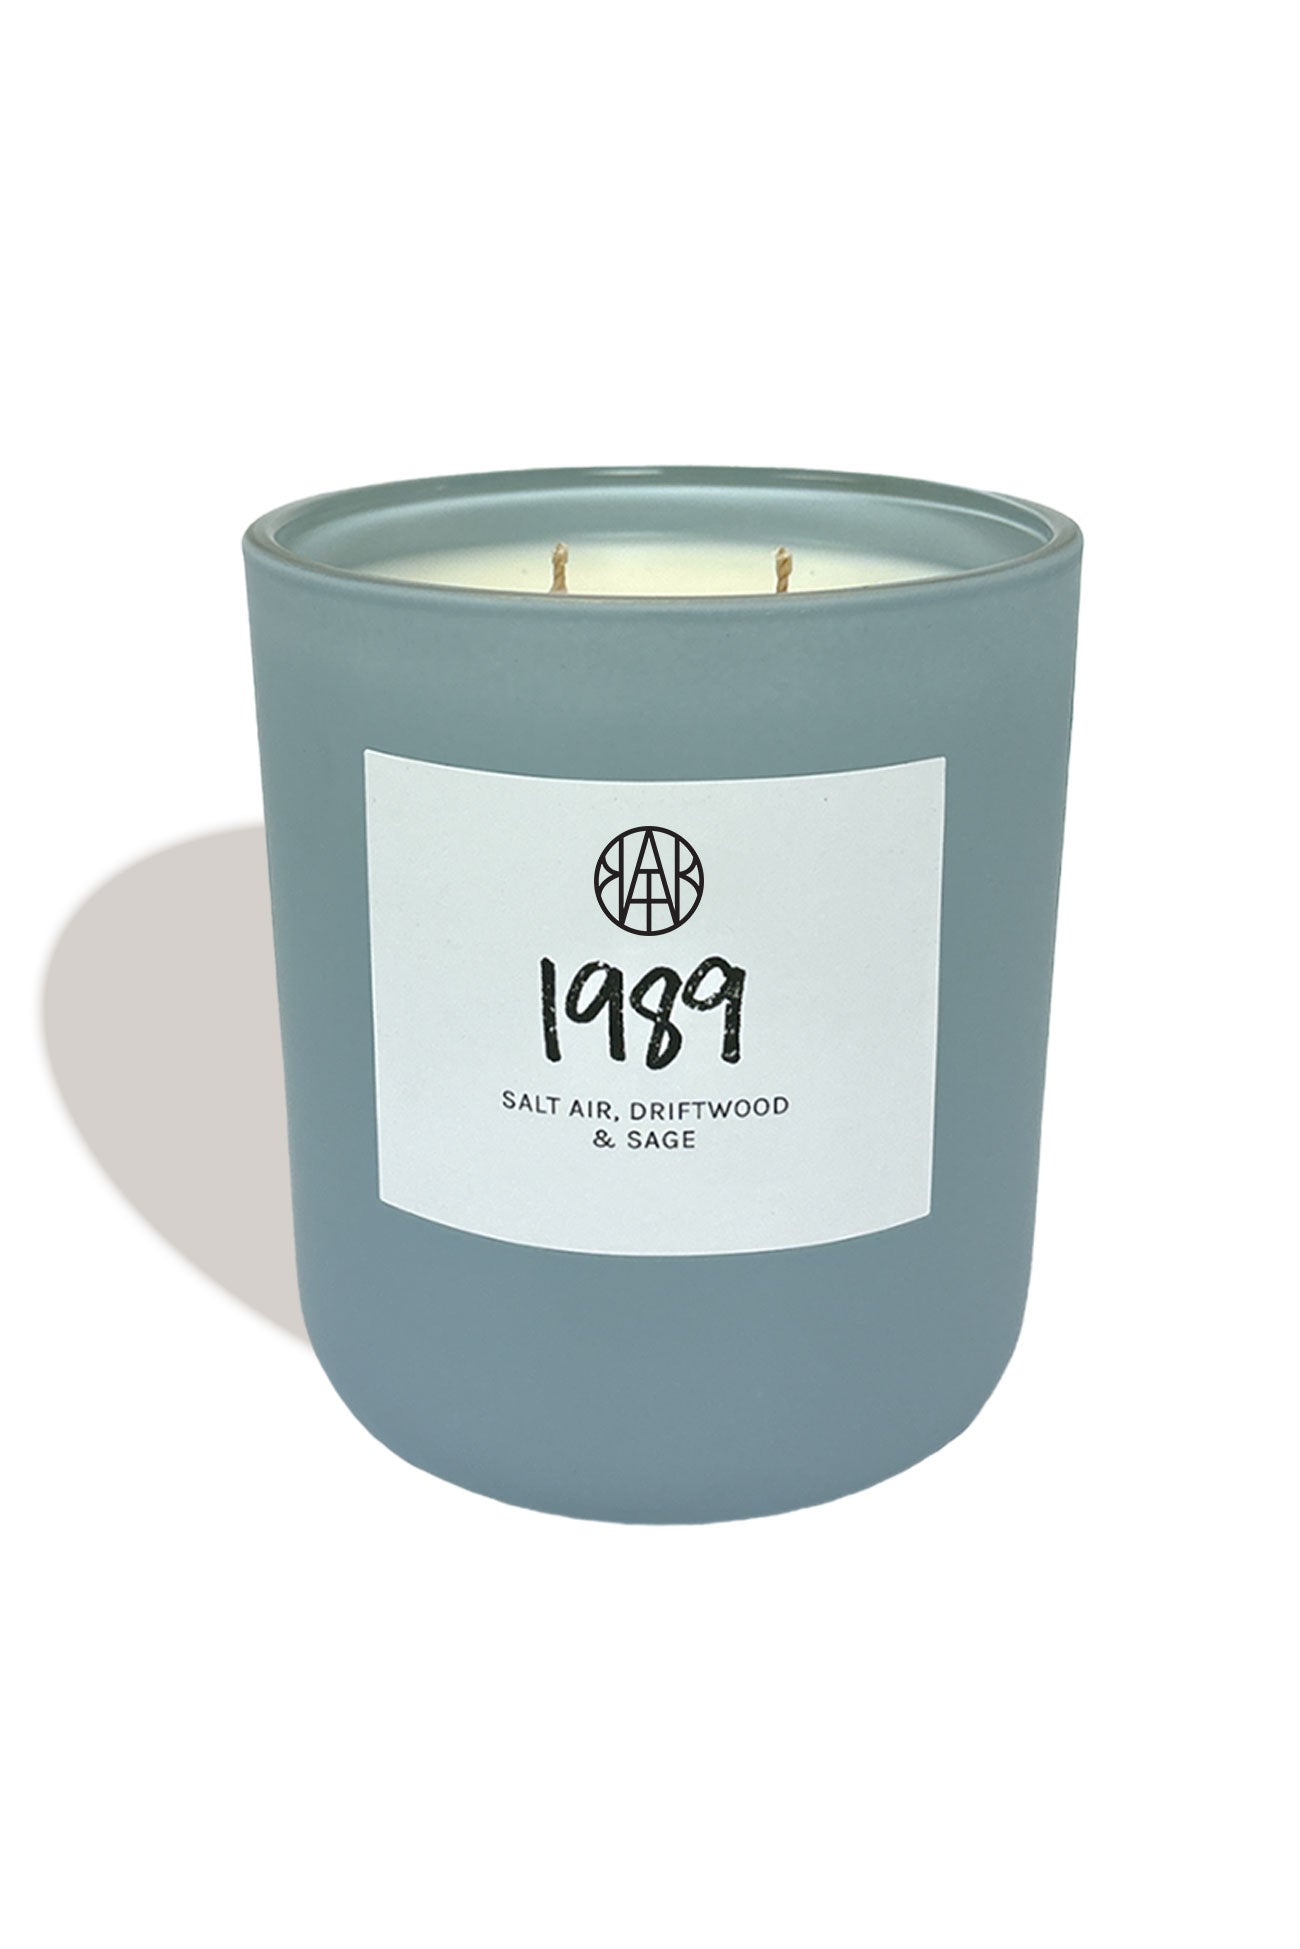 1989 - Deluxe Candle - AEMBR - Clean Luxury Candles, Wax Melts &amp; Laundry Care